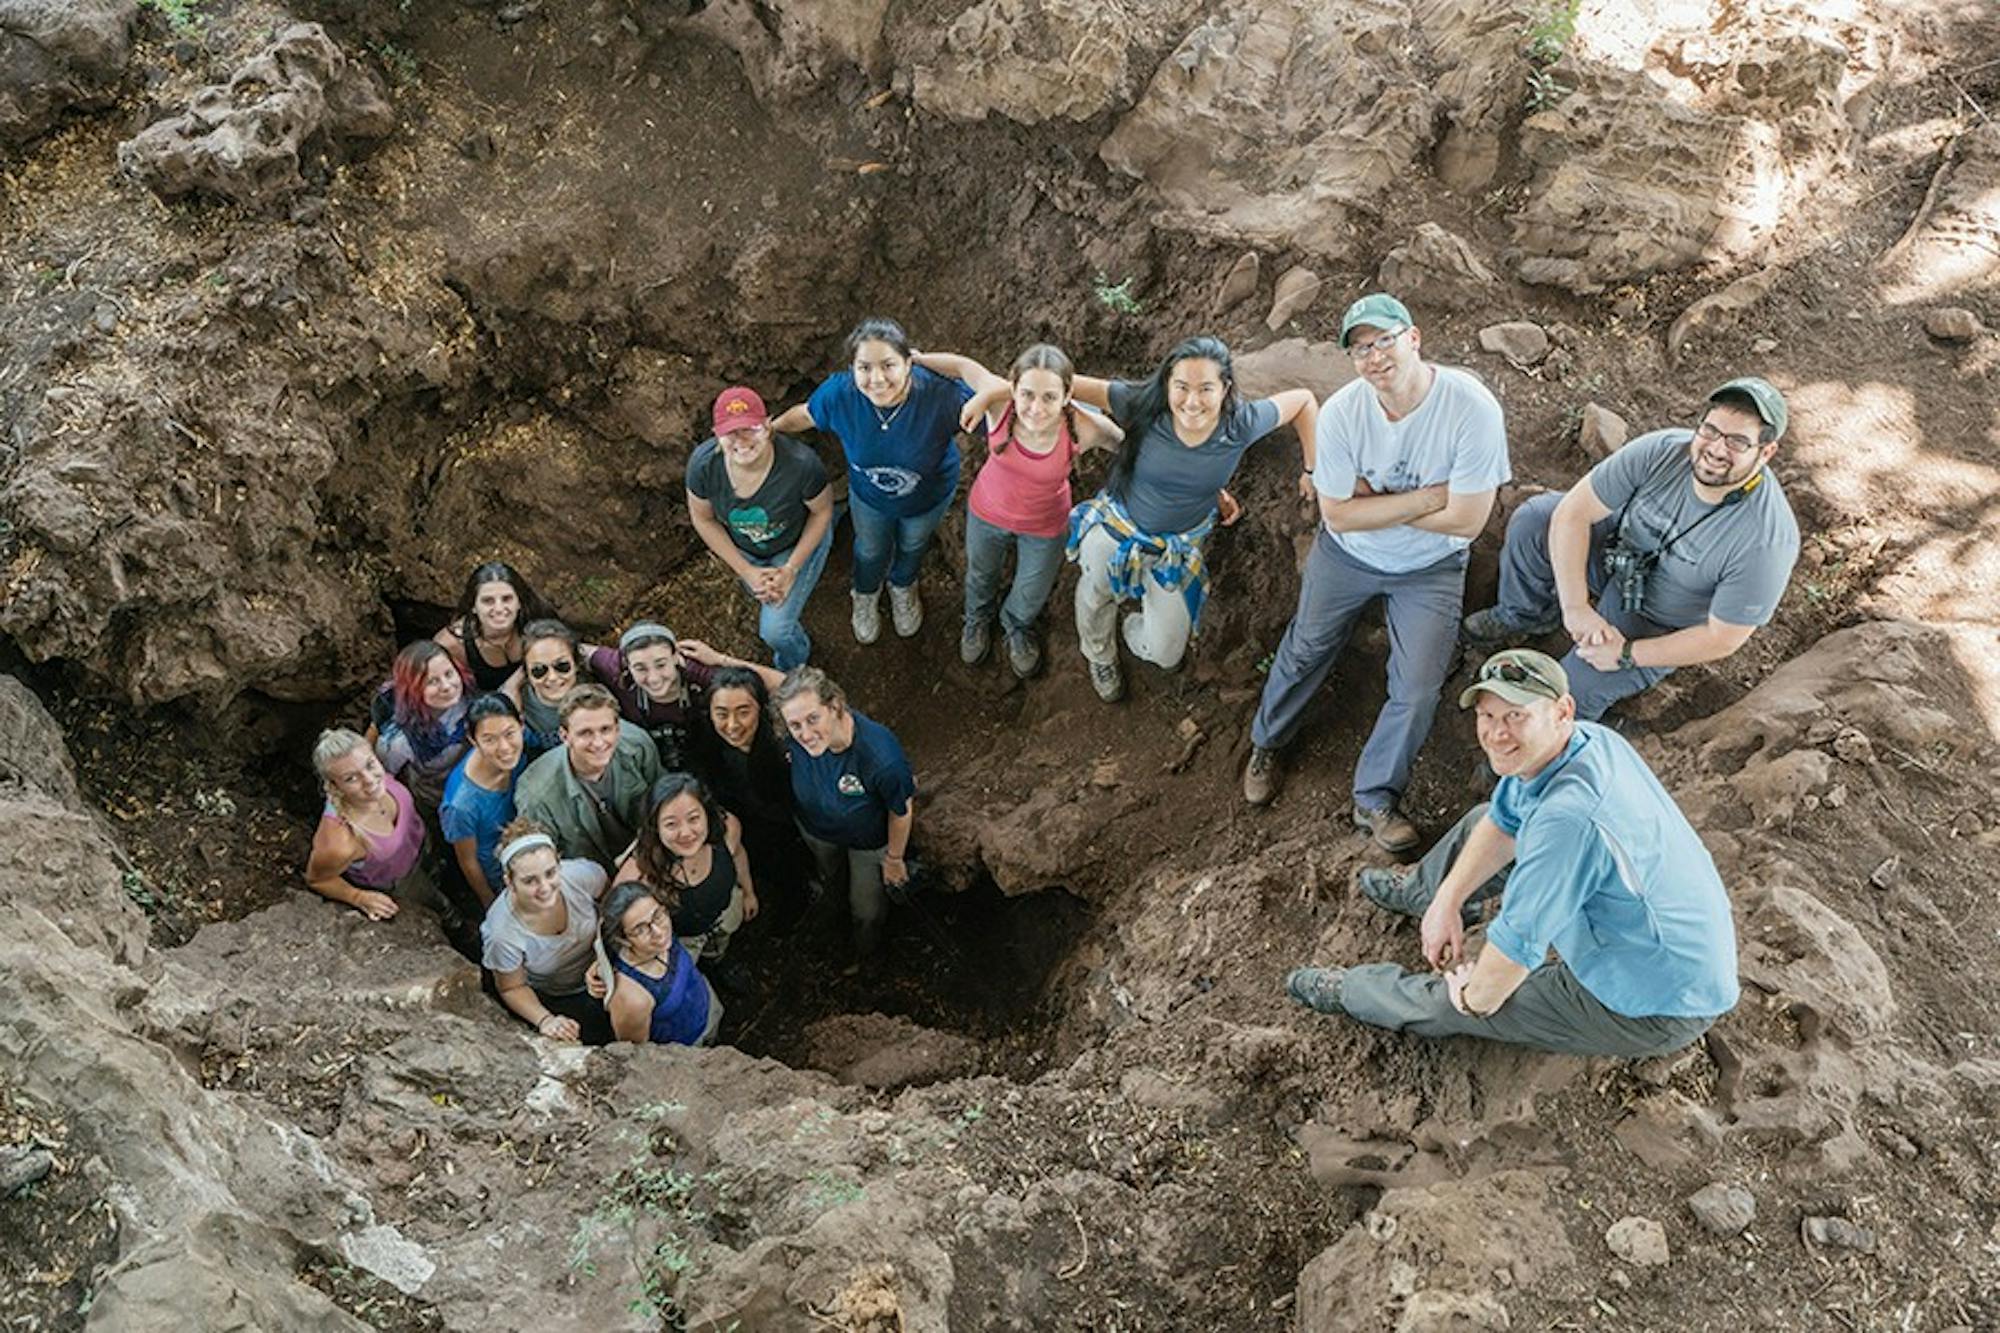 The class poses at the Malapa dig site., South Africa, Anthropology 70